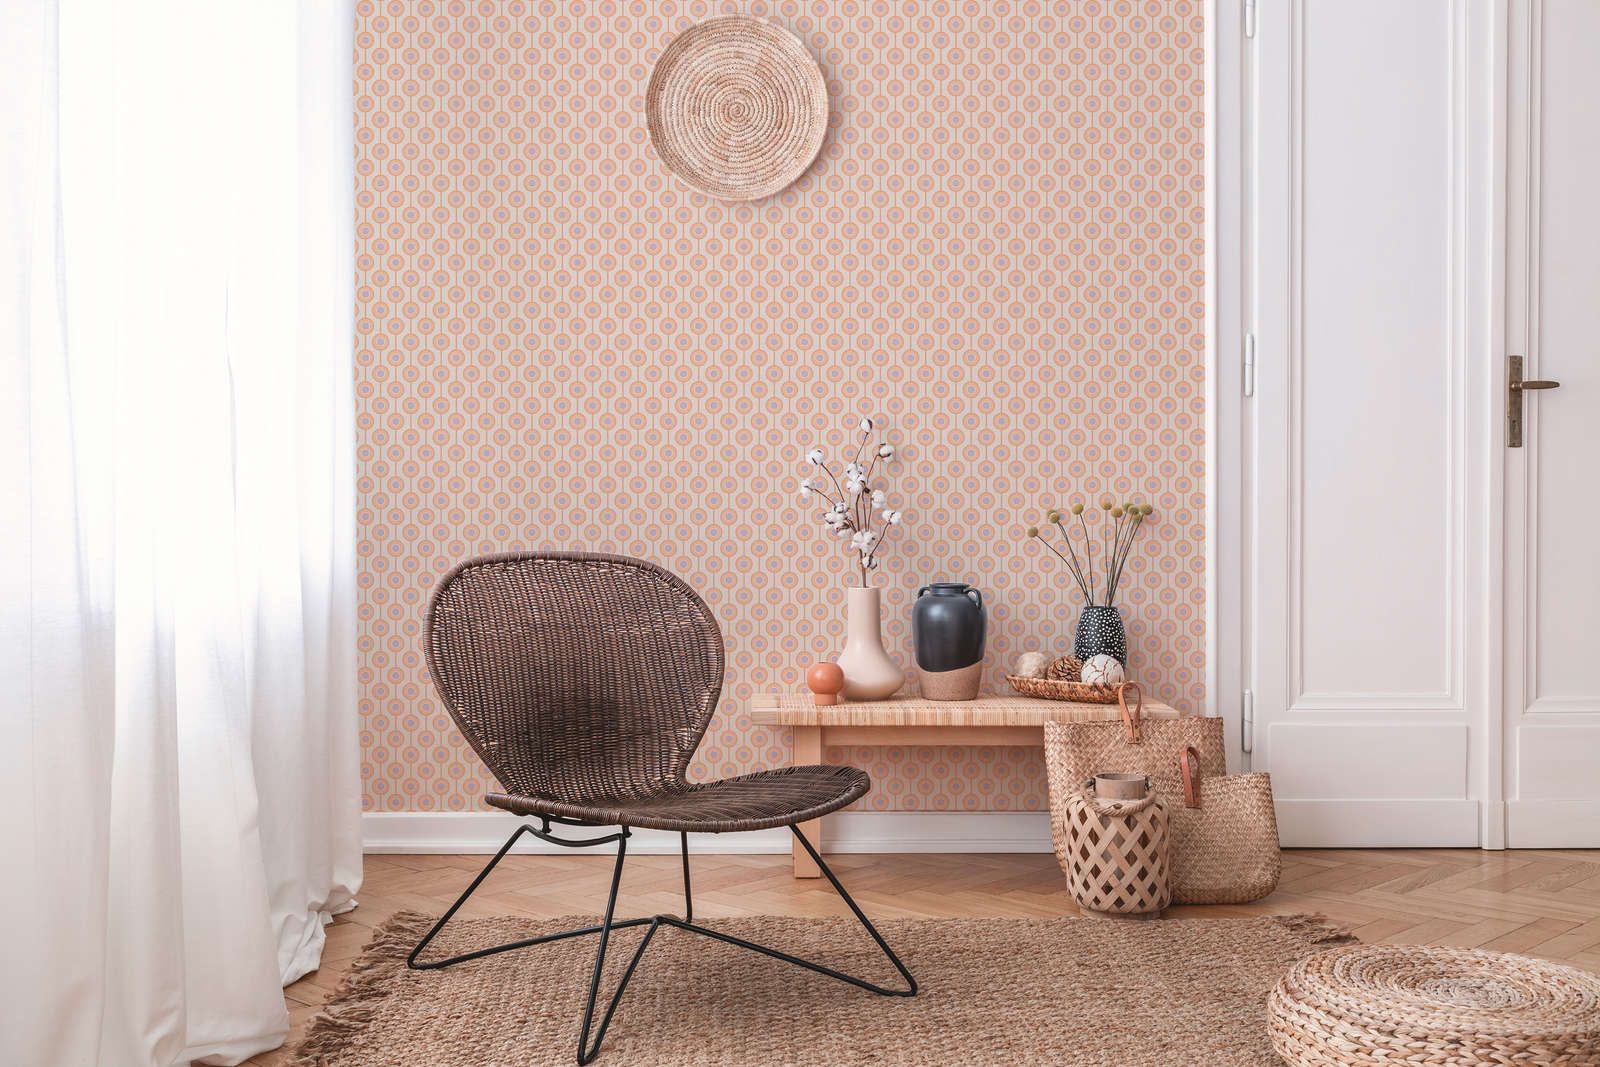             Non-woven wallpaper with circle pattern in soft colours - beige, orange, purple
        